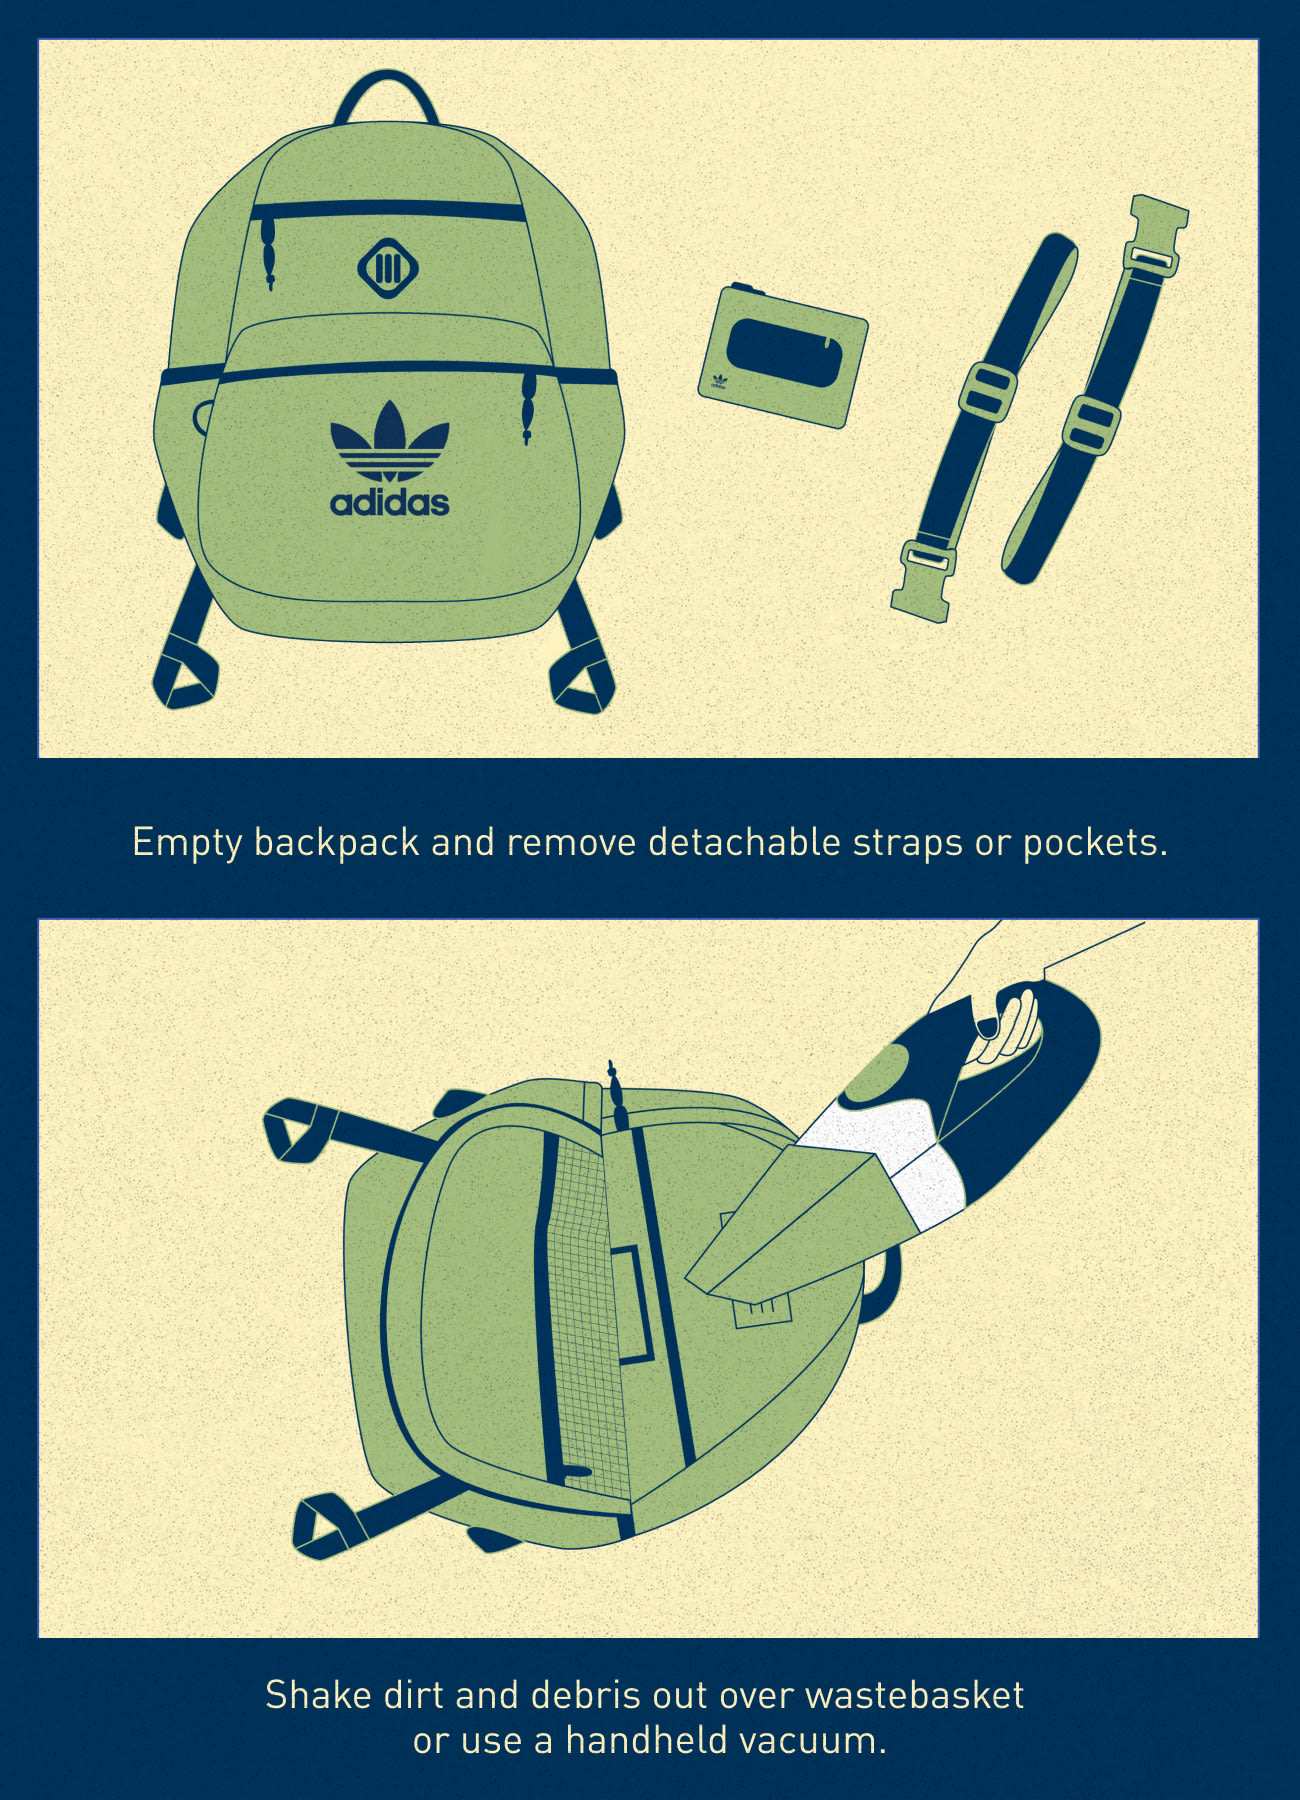 How to Wash a Backpack: A Step-by-Step Guide